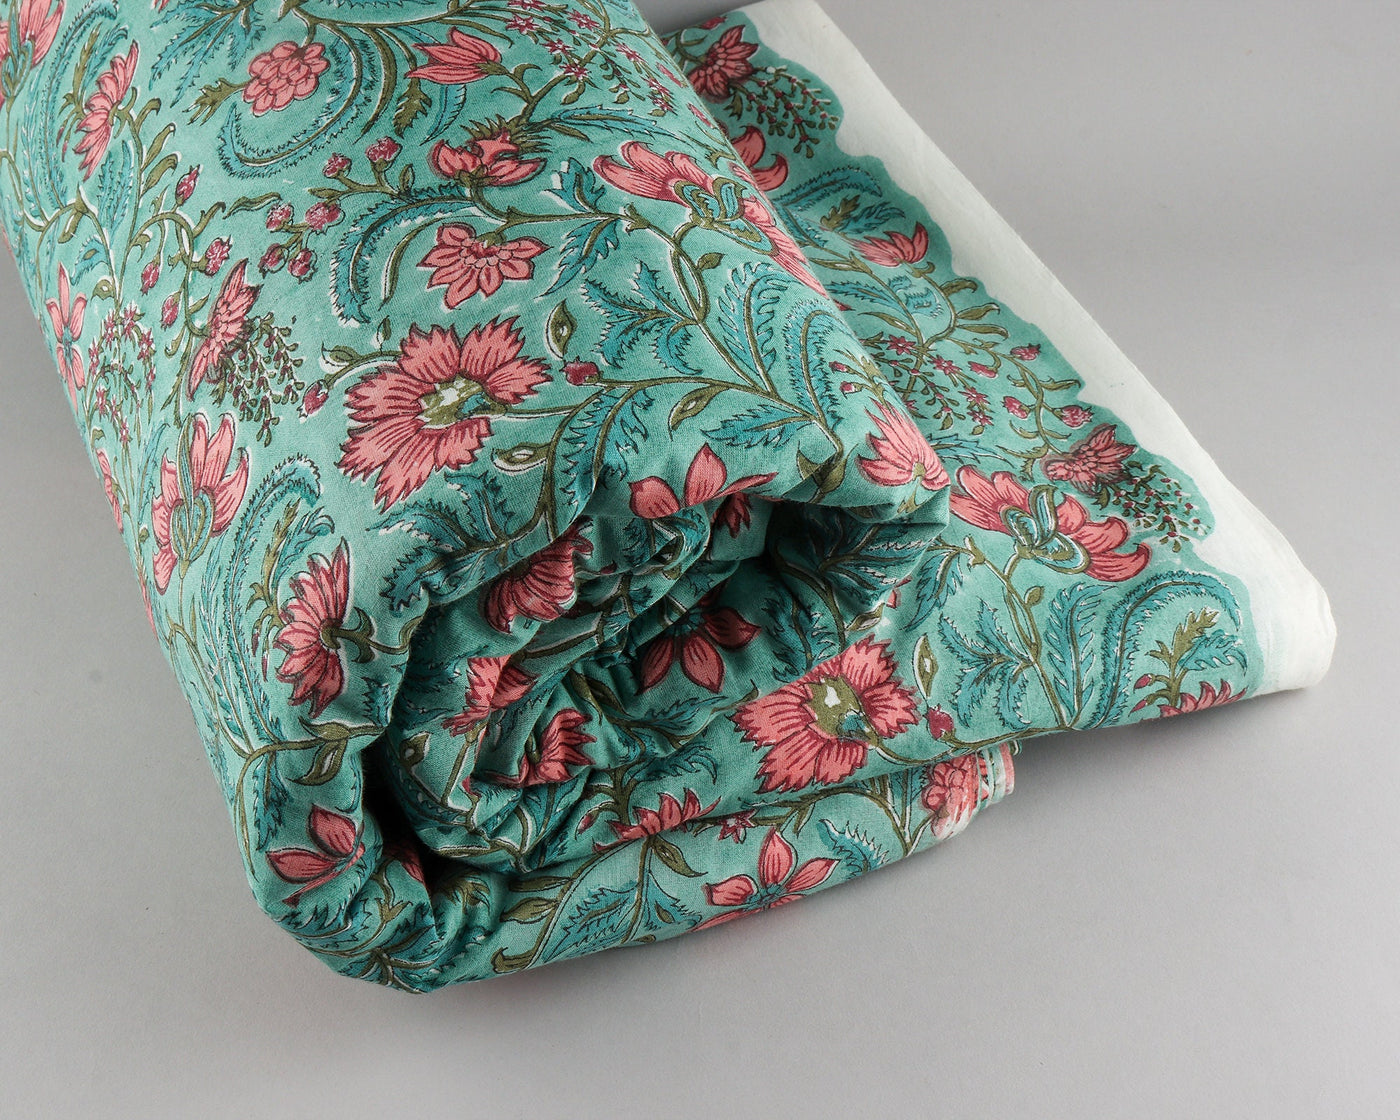 Turquoise Green, Light Coral Indian Floral Hand Block Printed 100% Pure Cotton Cloth, Fabric by the yard, Womens clothing Curtains Pillows